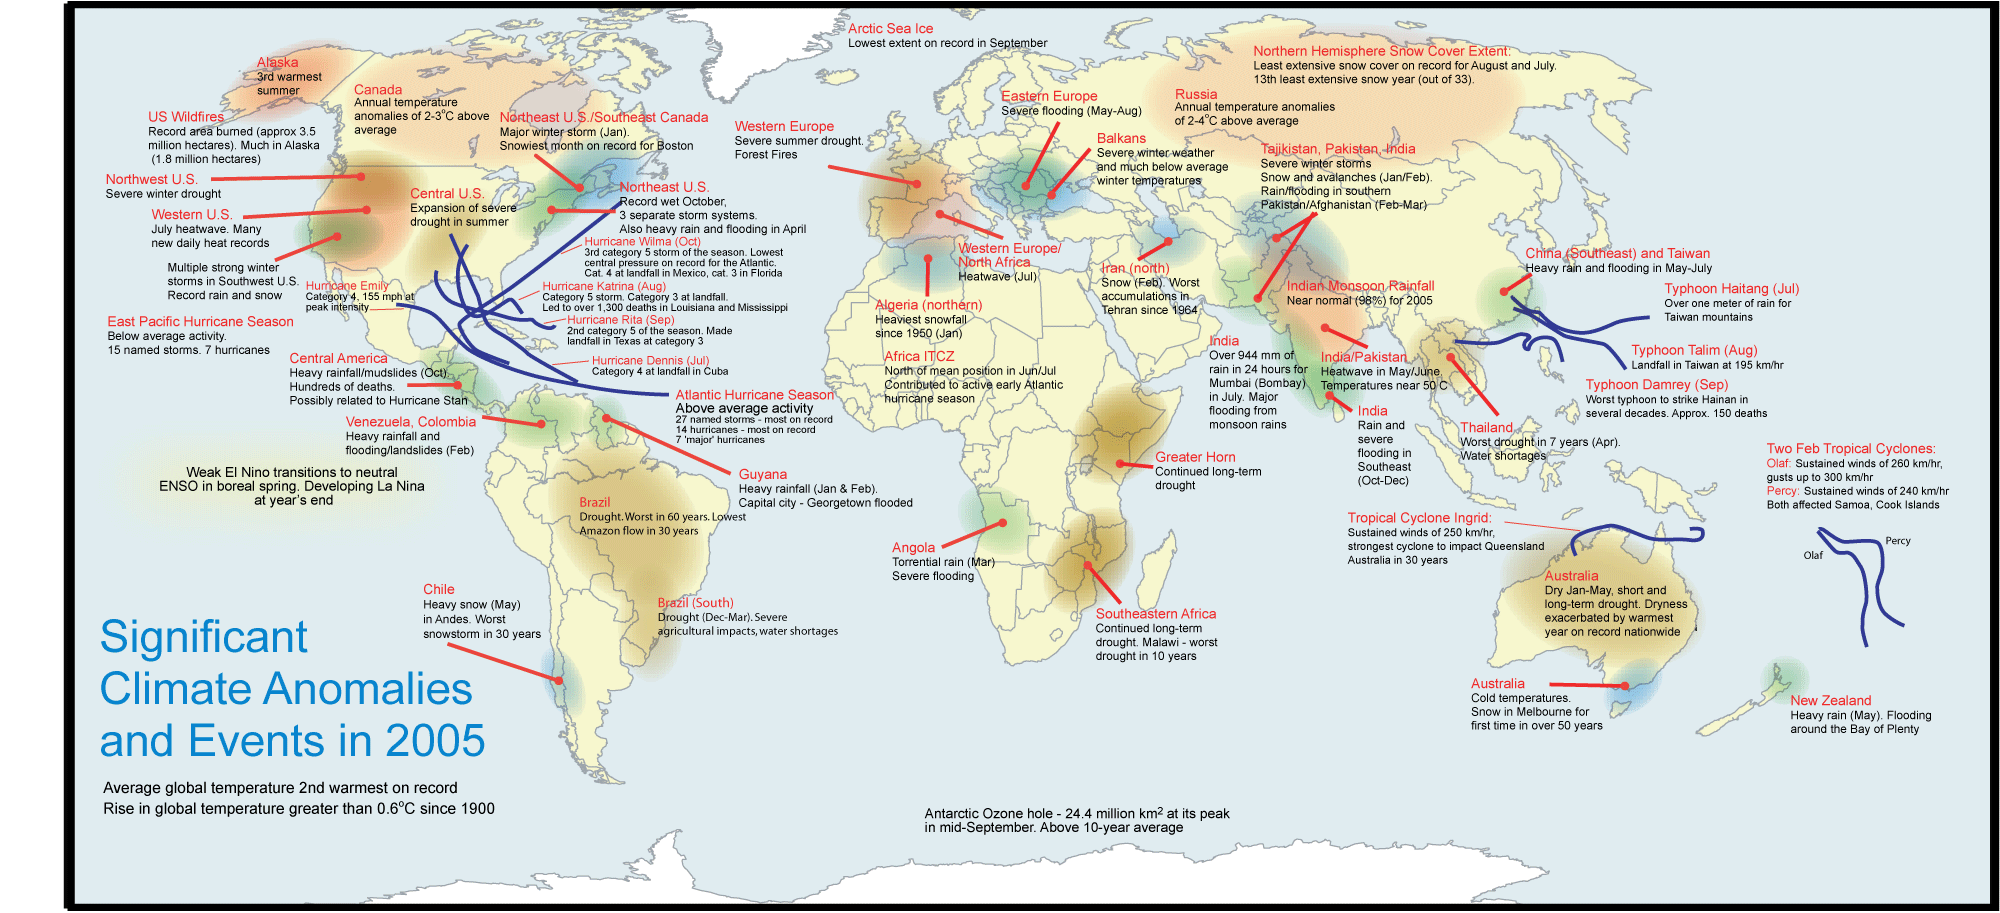 Significant Climate Anomalies and Events in 2005